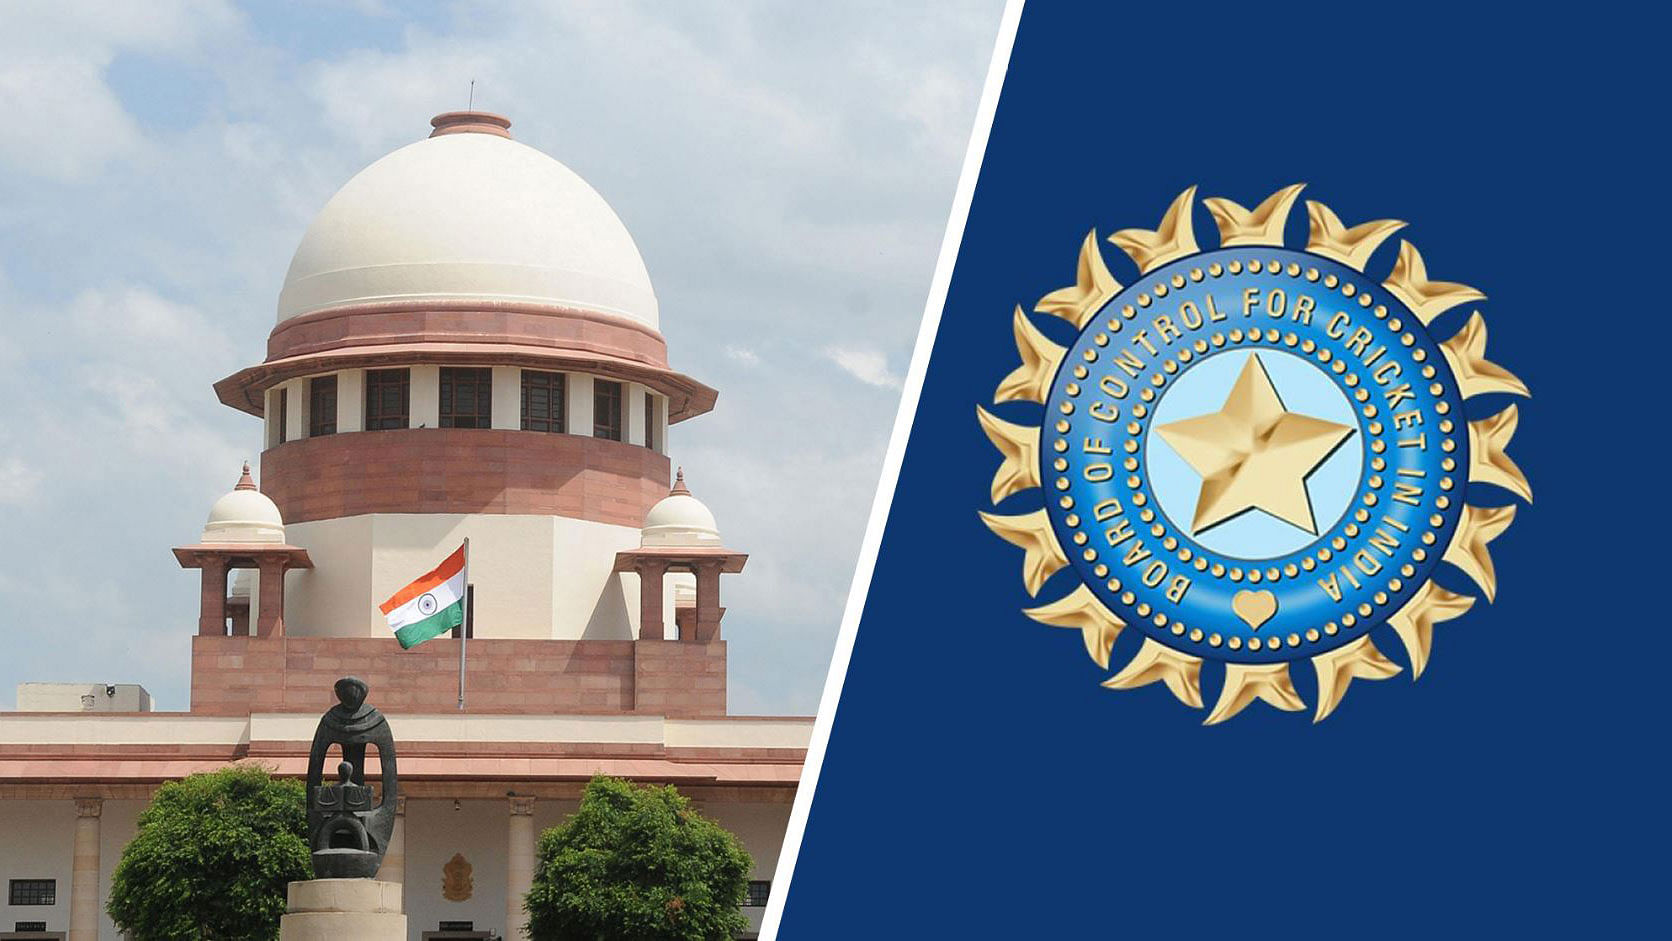 The Supreme Court’s observations, dismissing the need for a cooling off period for BCCI office-bearers, came as a ray of hope for the embattled body on Thursday.